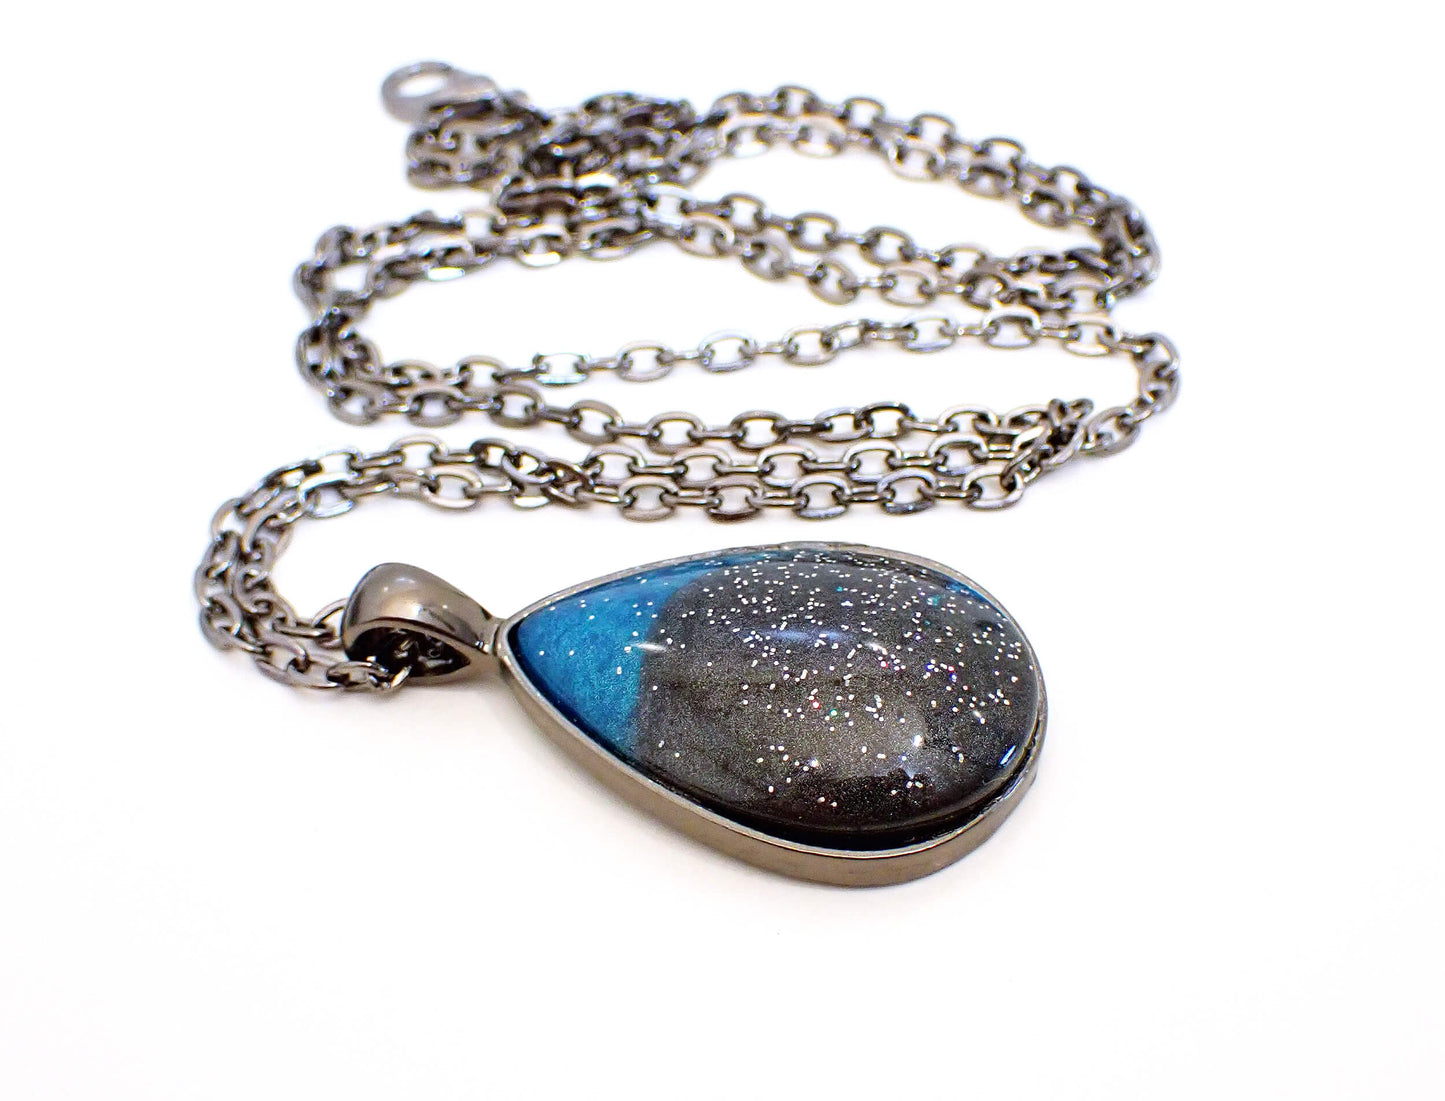 Gunmetal Handmade Teal Blue and Dark Gray Resin Teardrop Pendant Necklace with Holographic Glitter